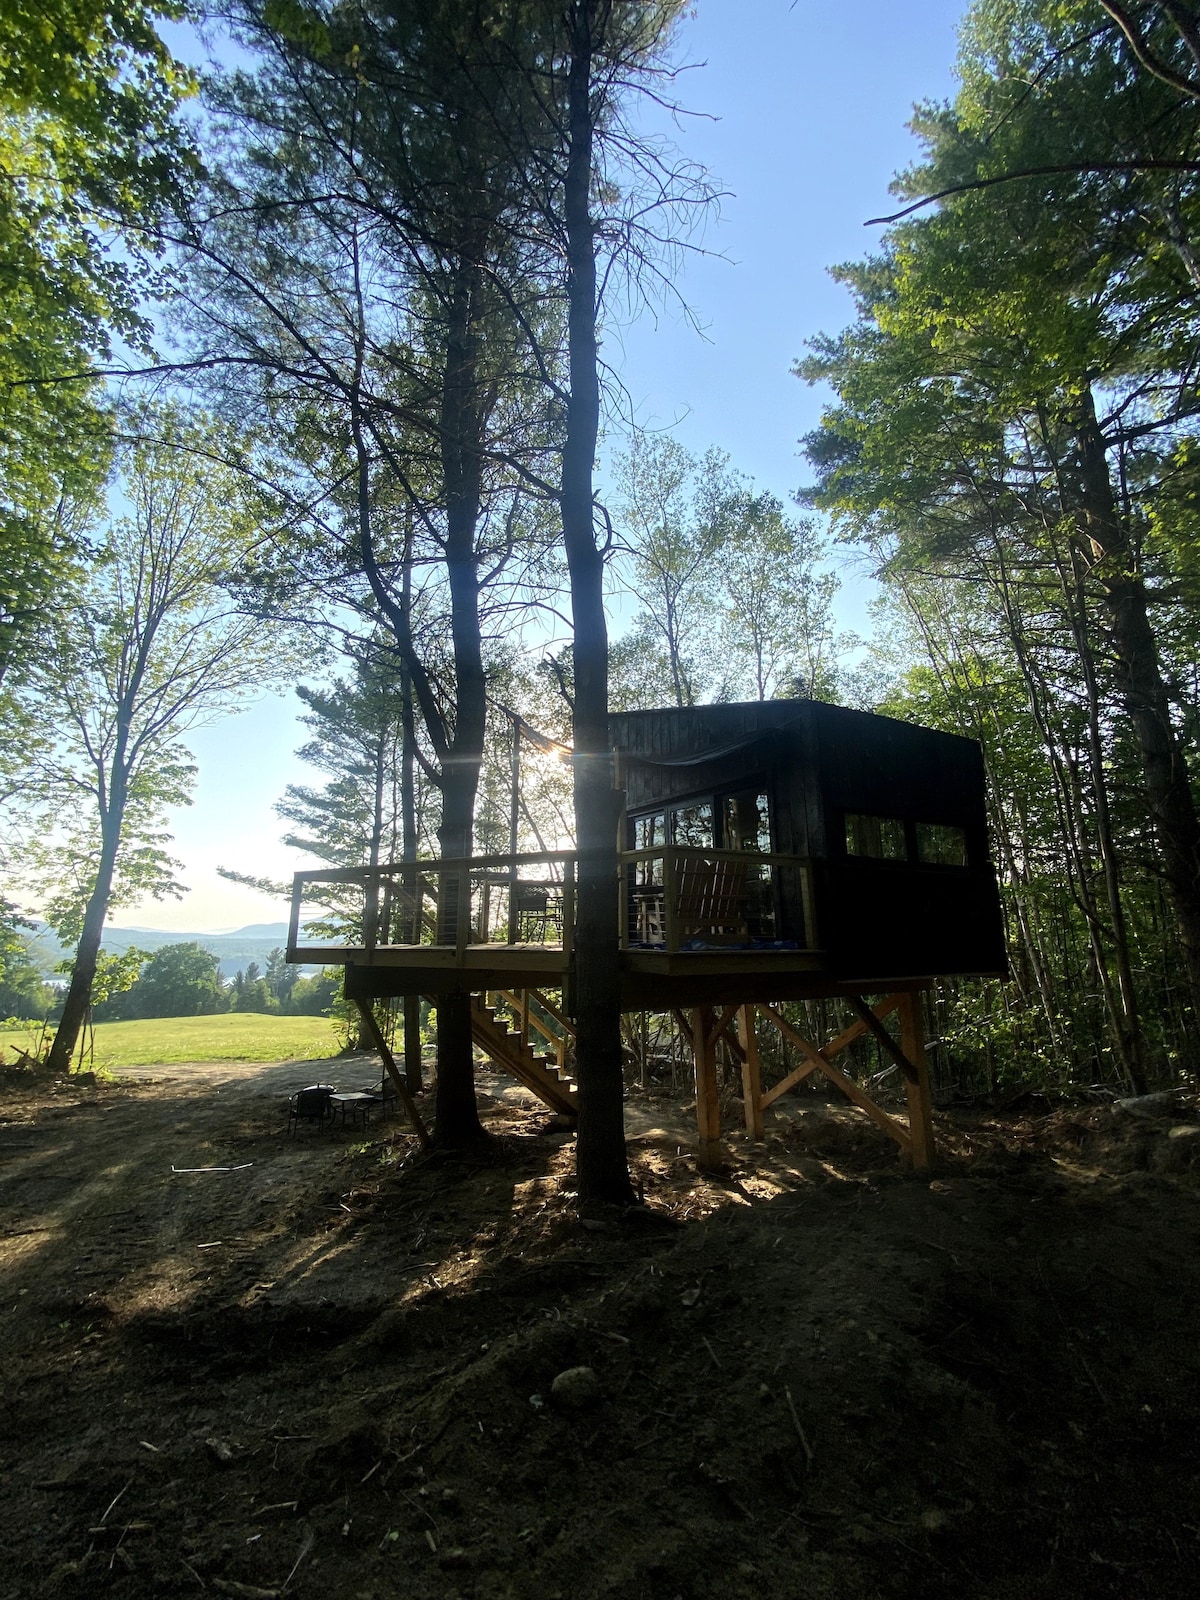 The Lake Willoughy Treehouse